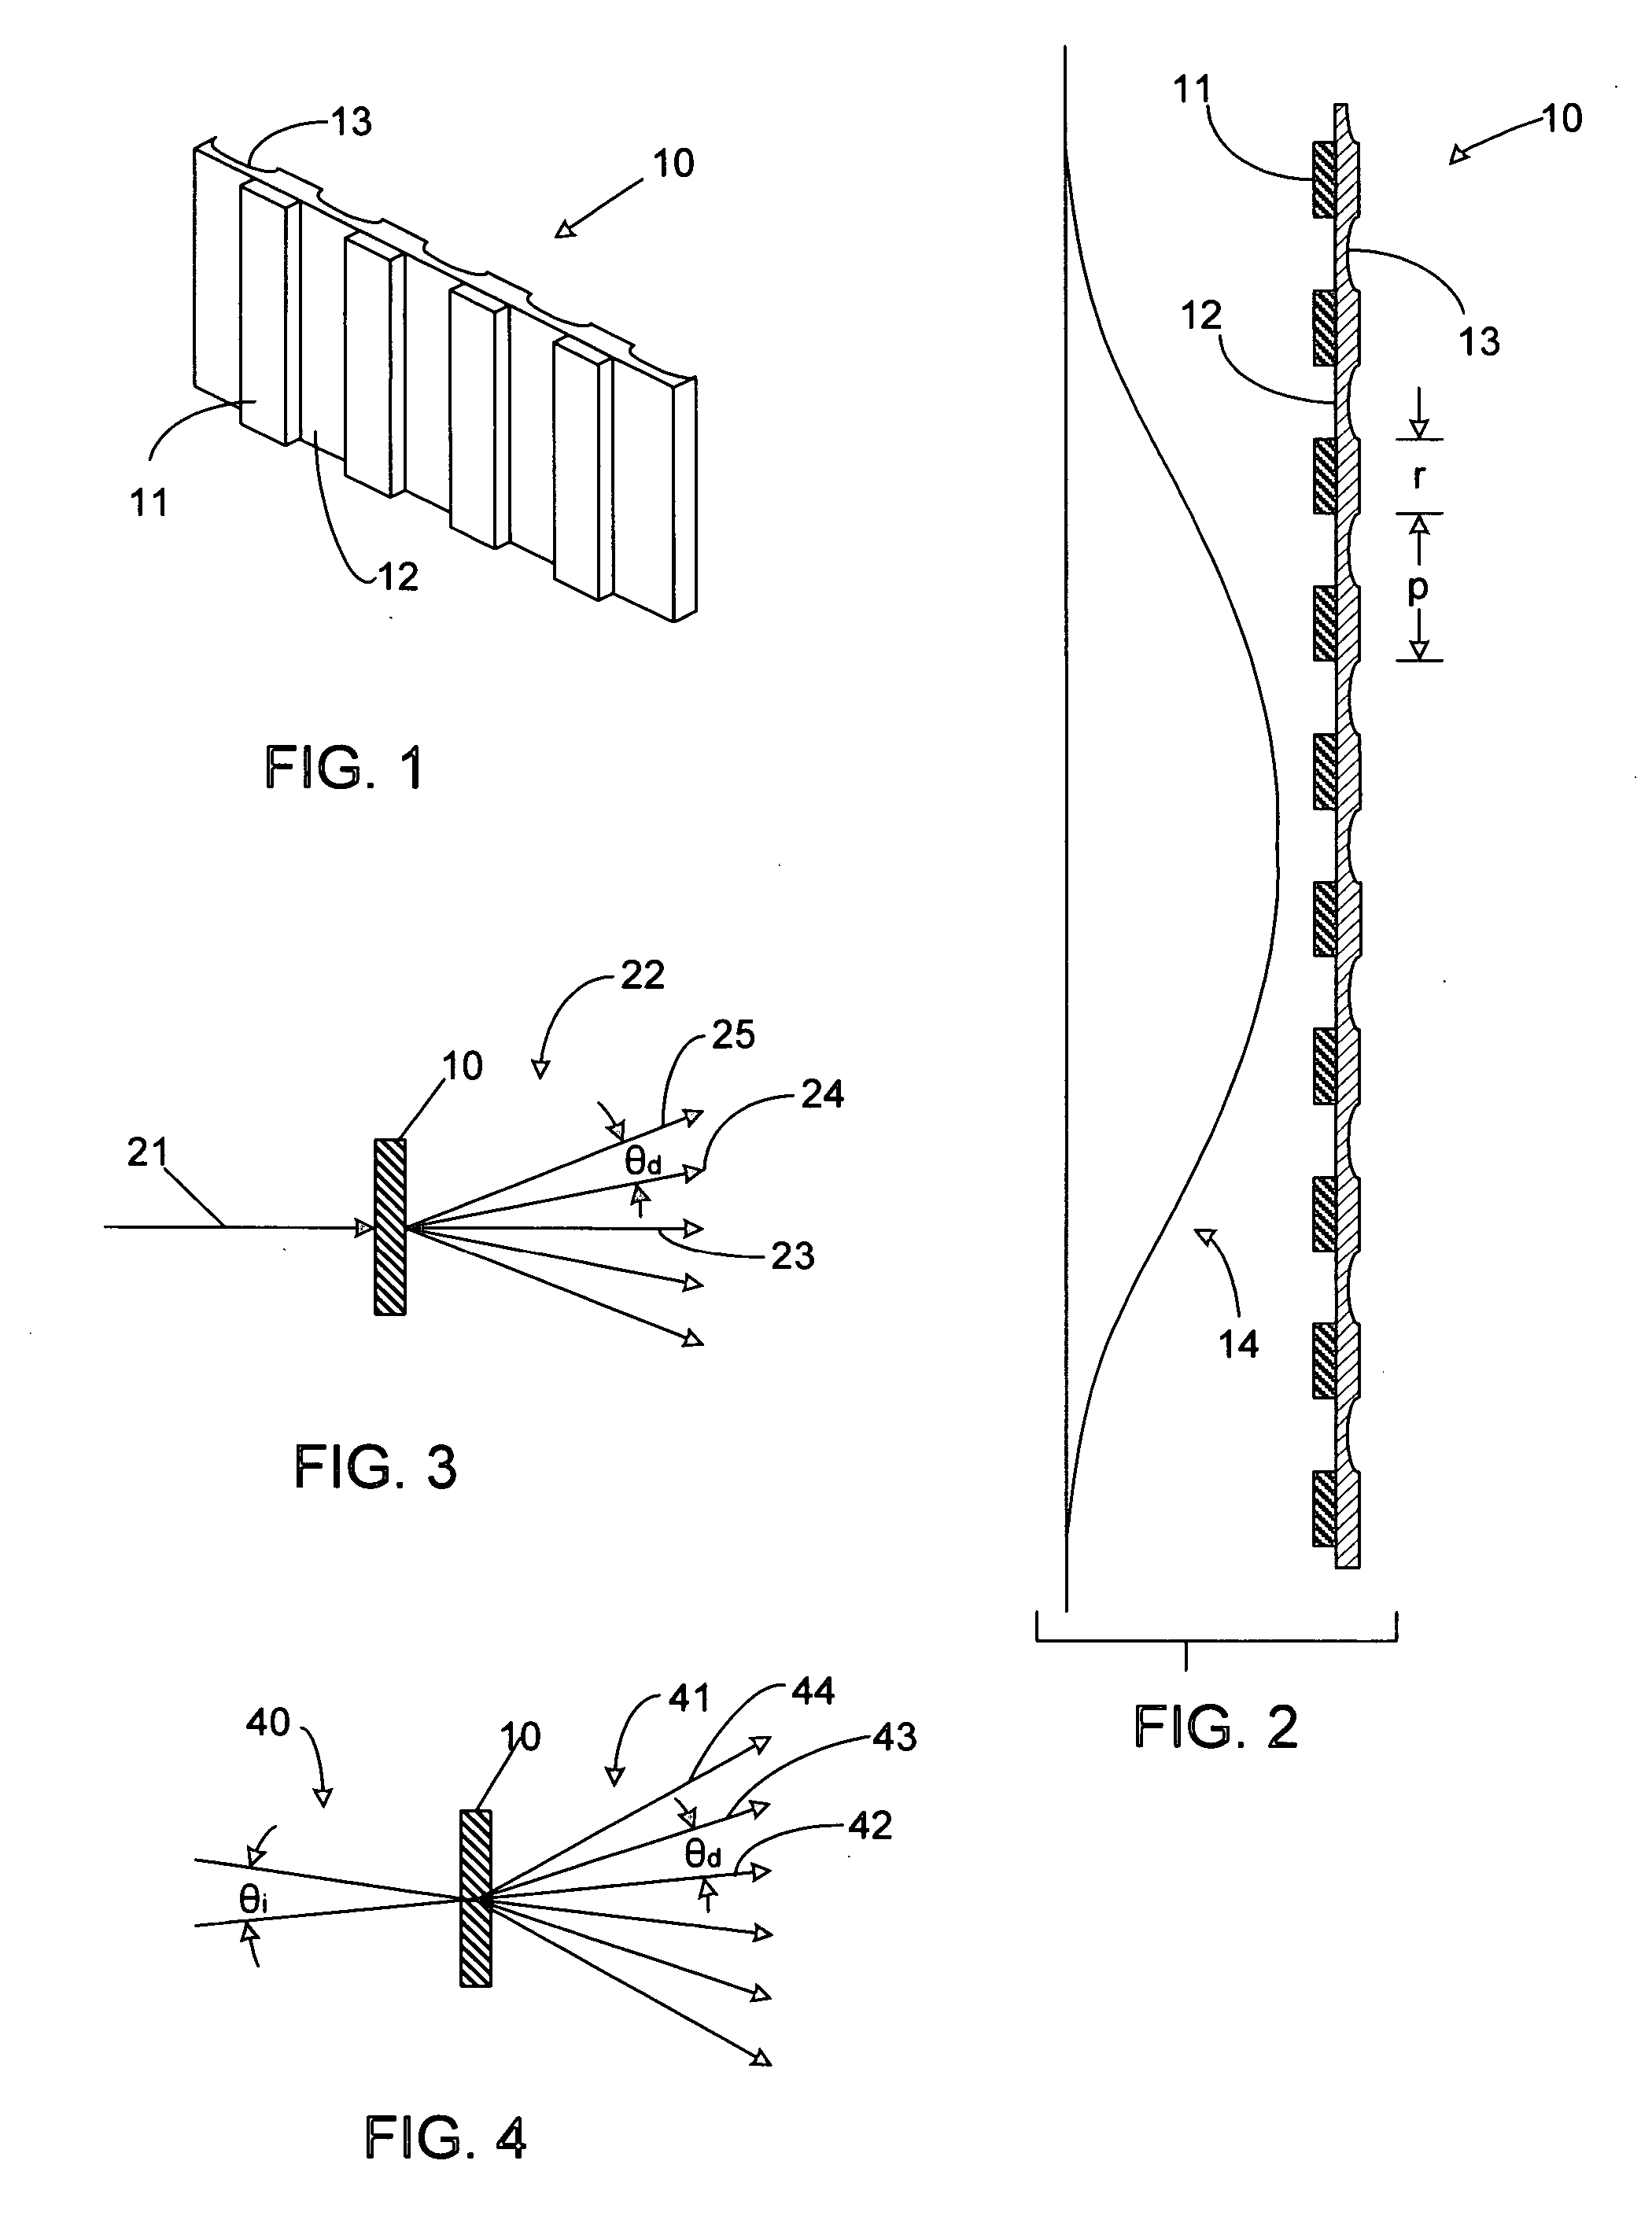 Method and apparatus for generating and detecting duality modulated electromagnetic radiation